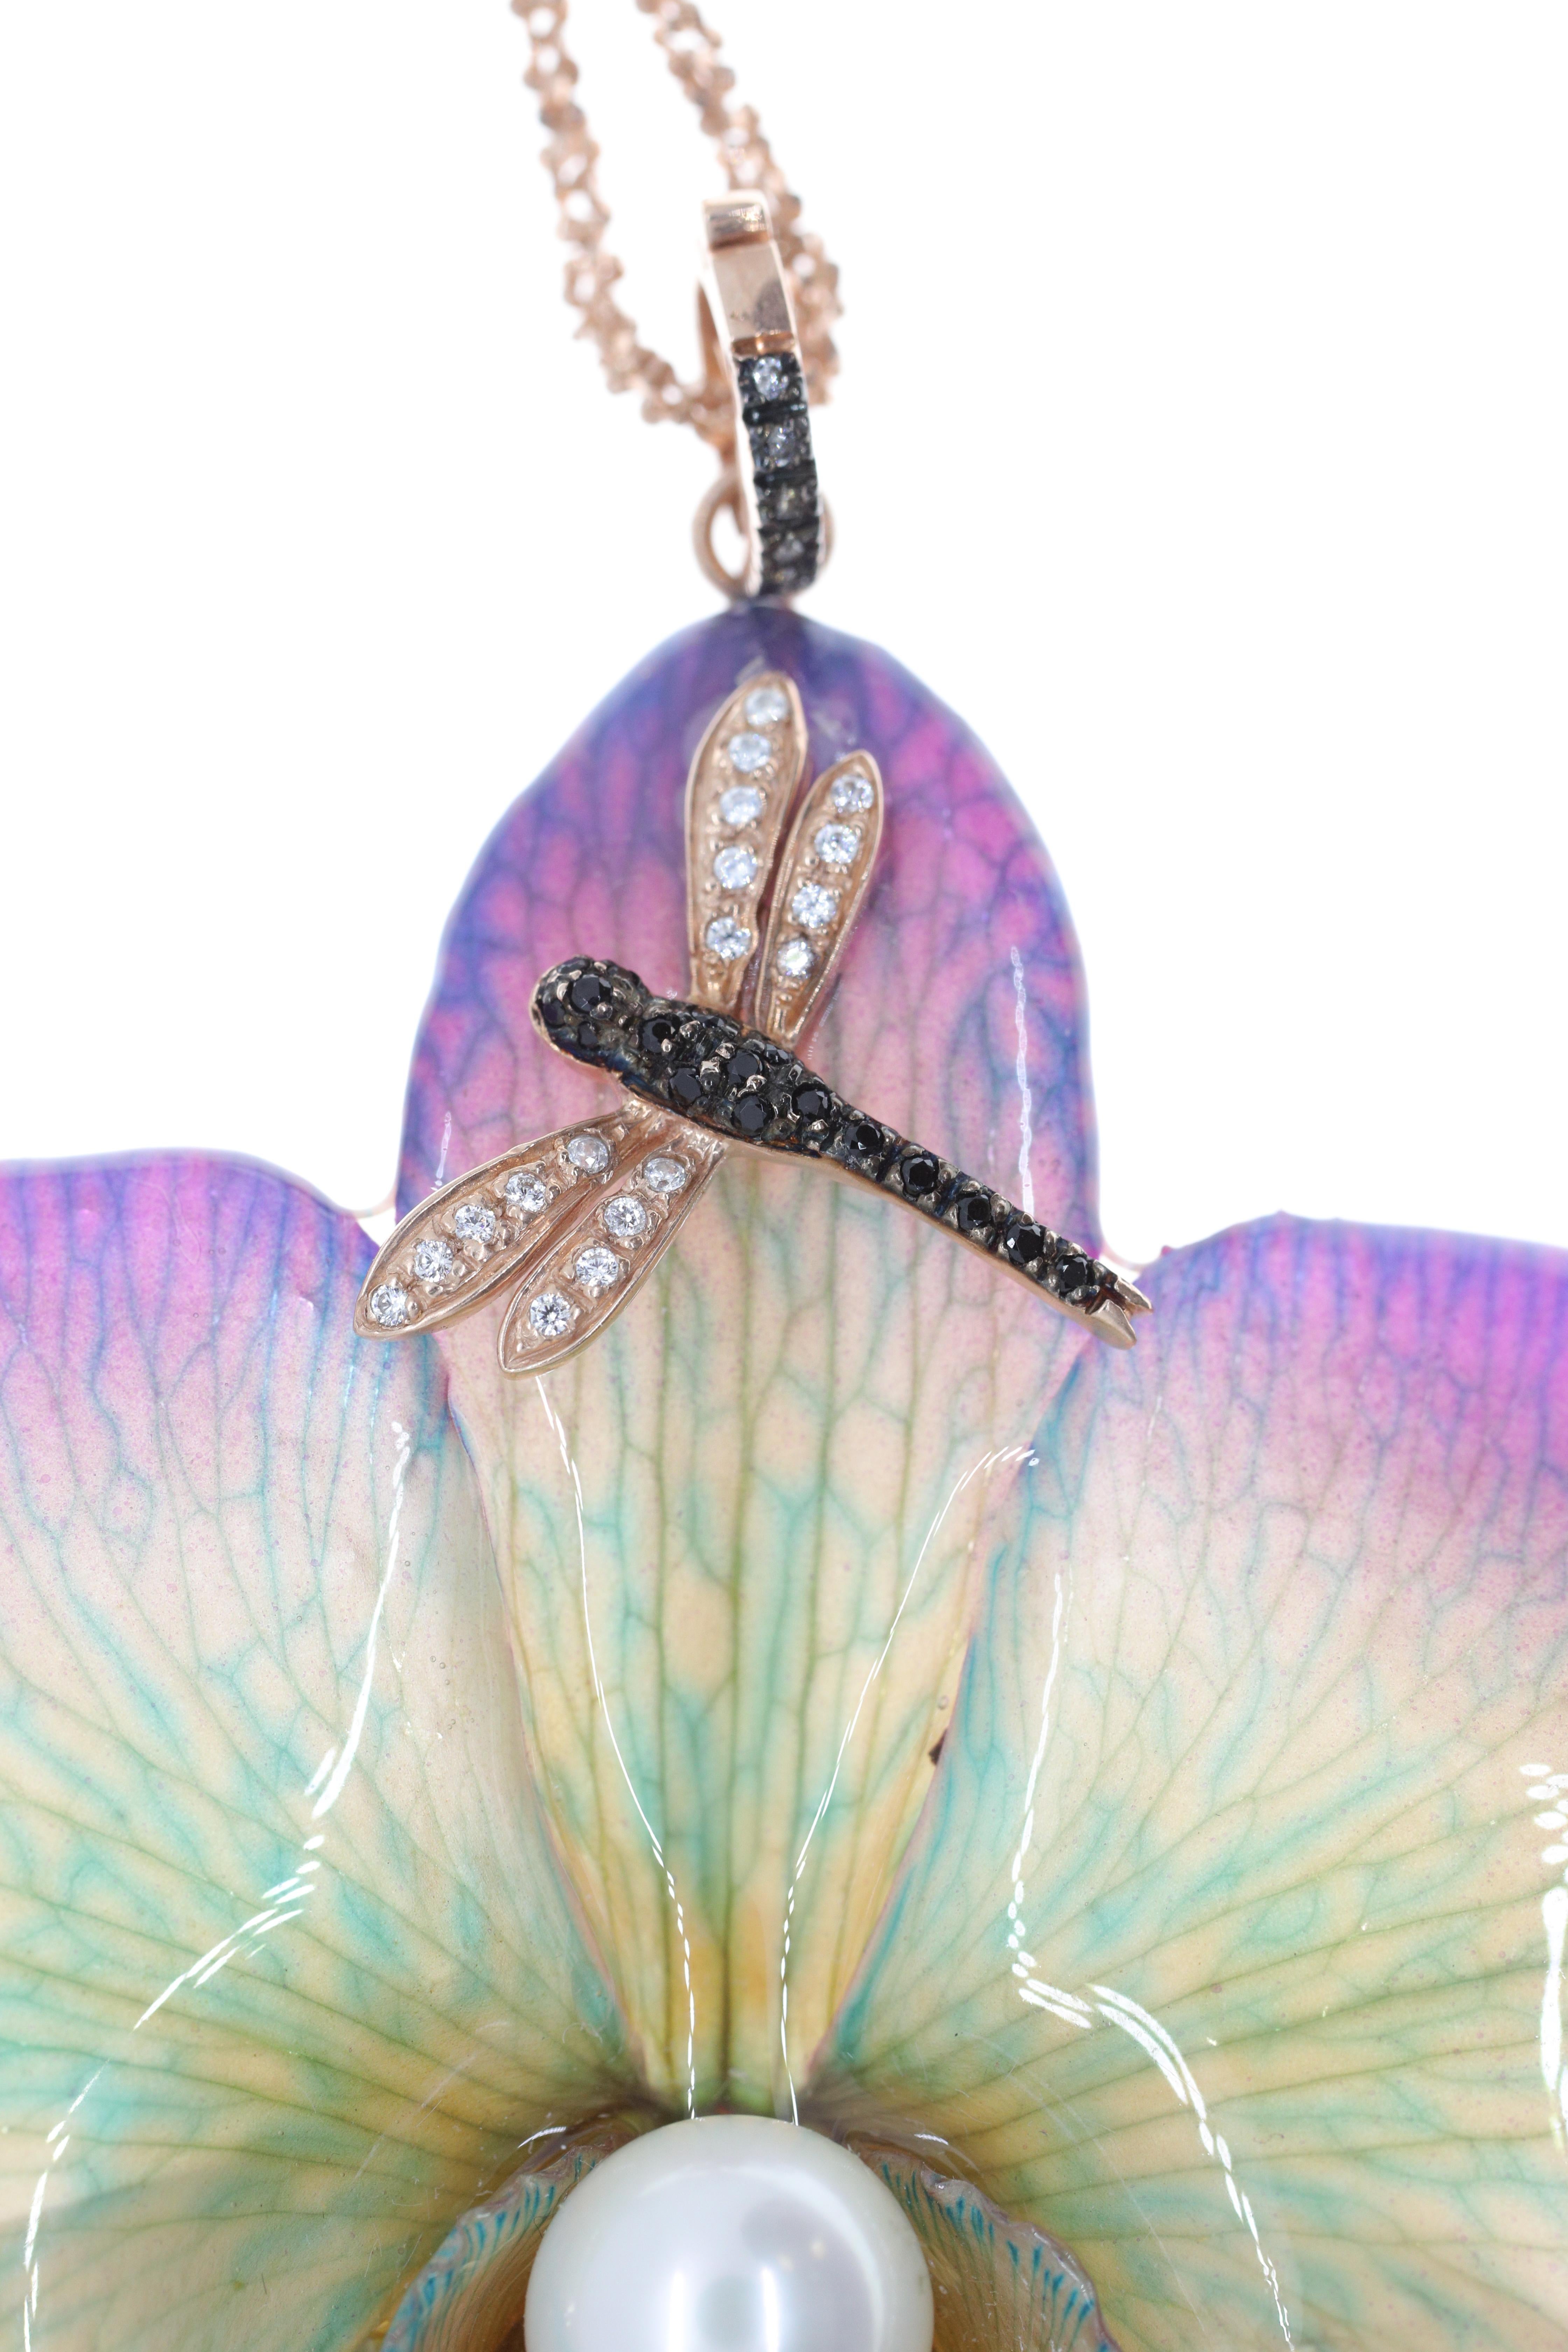 Part jewel, part objet d'art, this pendant was inspired by and made directly from the brilliance and wonder of the natural world. A large, real orchid flower, crystallized at its most glorious moment for eternity hosts a black and white diamond-set